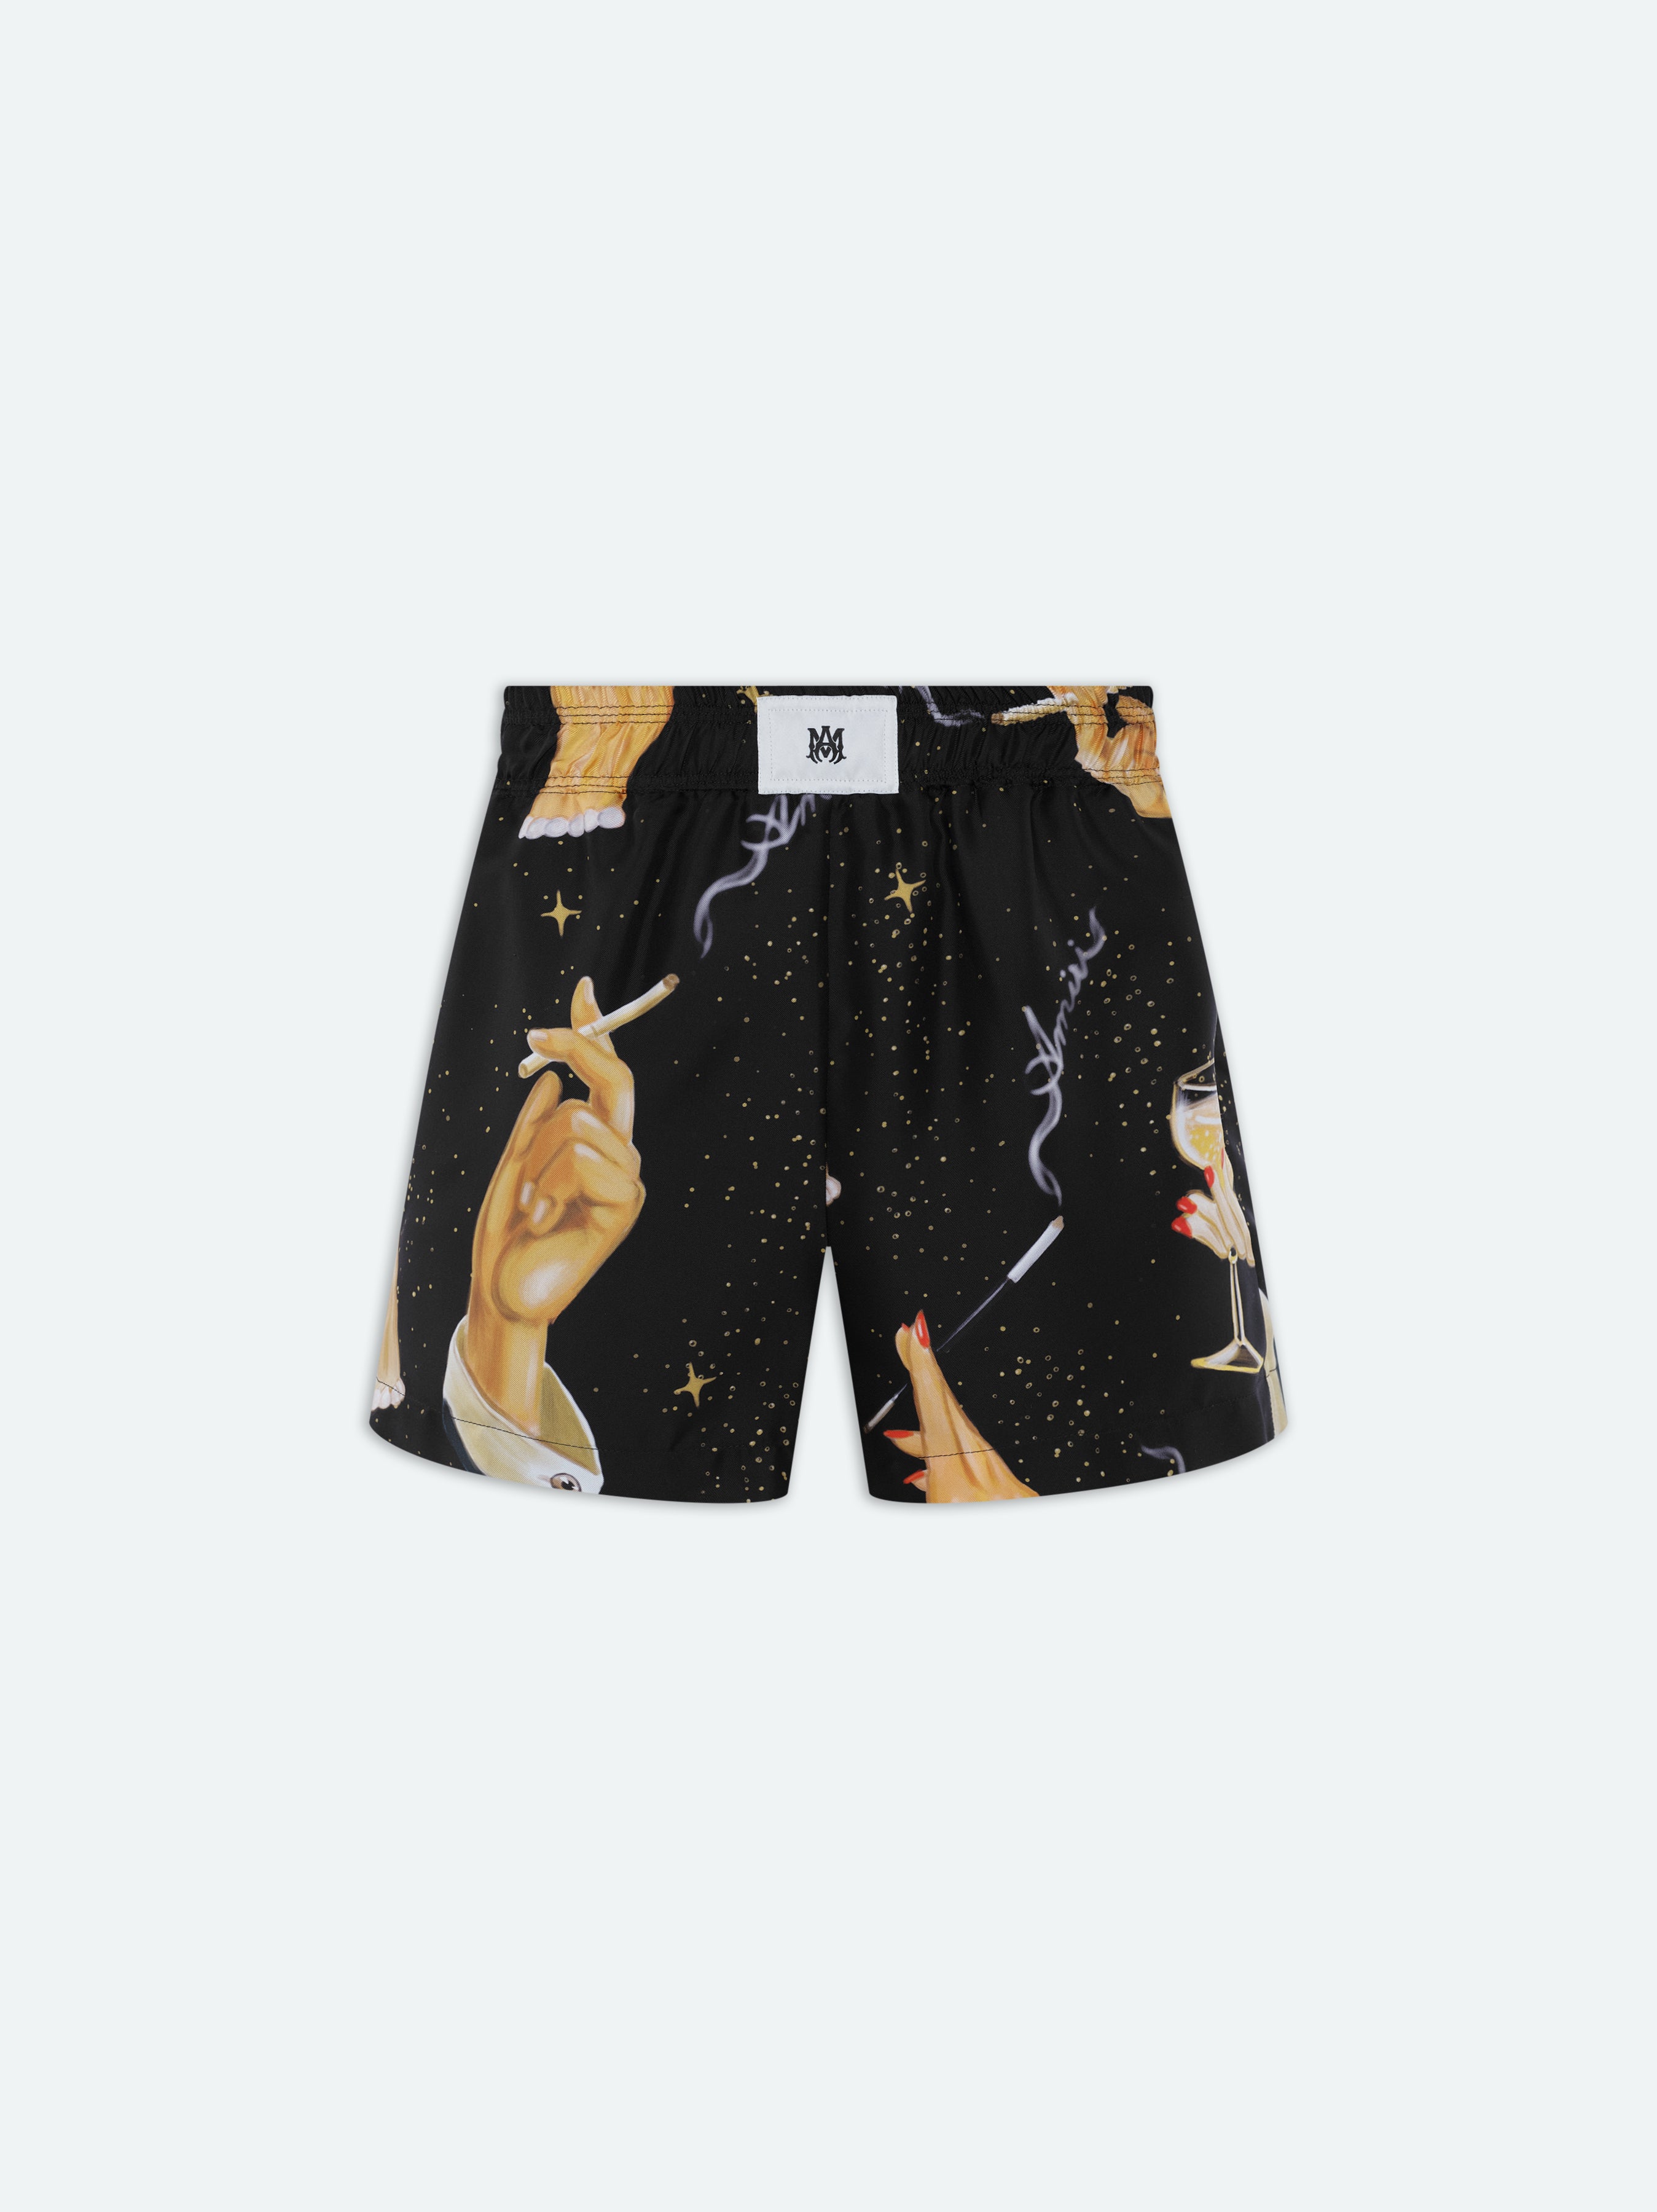 Product WOMEN - CHAMPAGNE BOXER SHORT - Black featured image